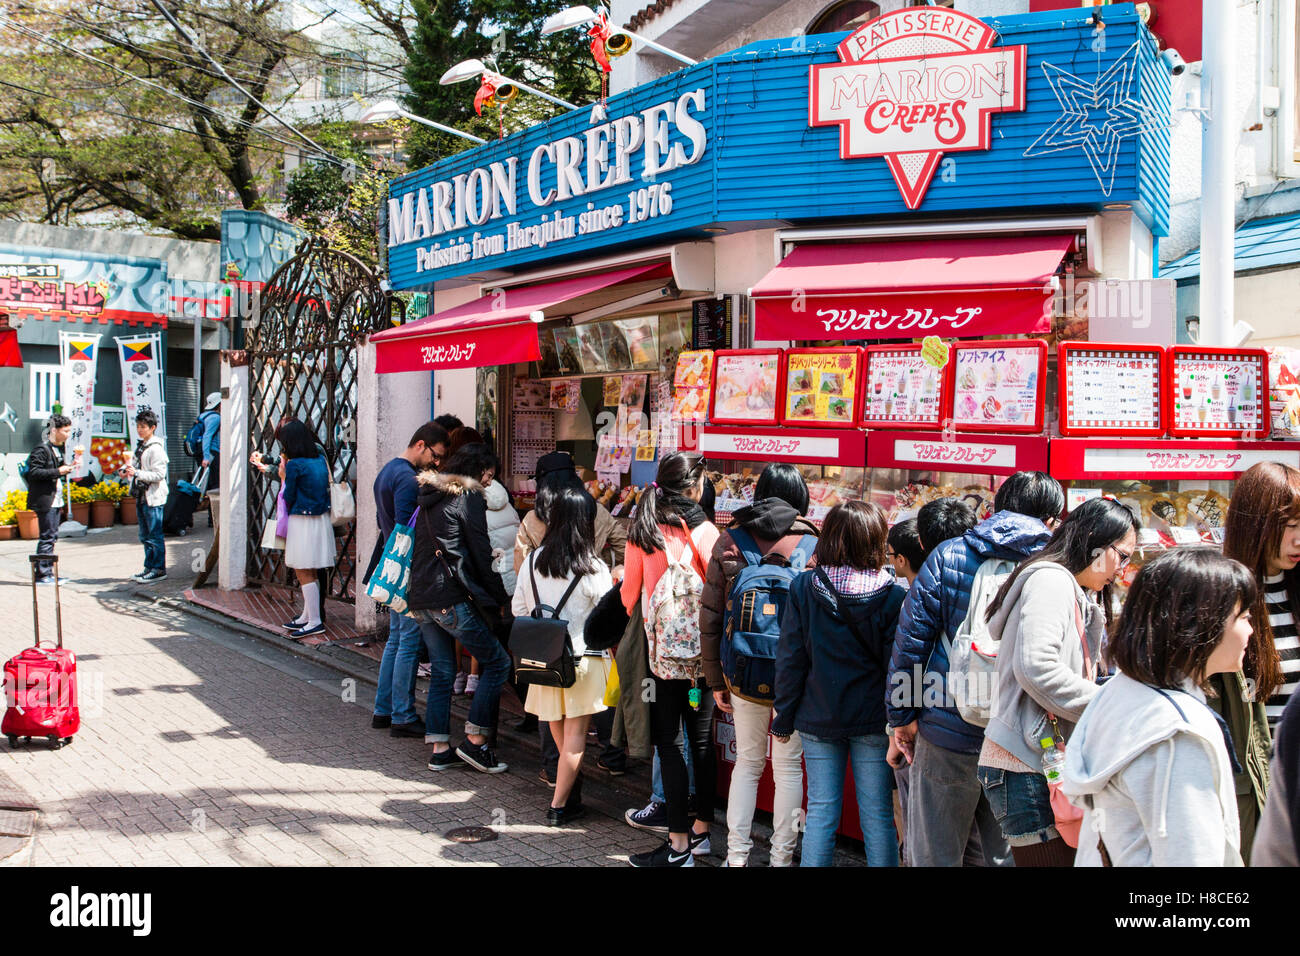 Japan, Tokyo, Harajuku, Takeshita-dori. Marion Crepes, famous patisserie with queue of Japanese teenagers queuing in winter sunshine. Stock Photo